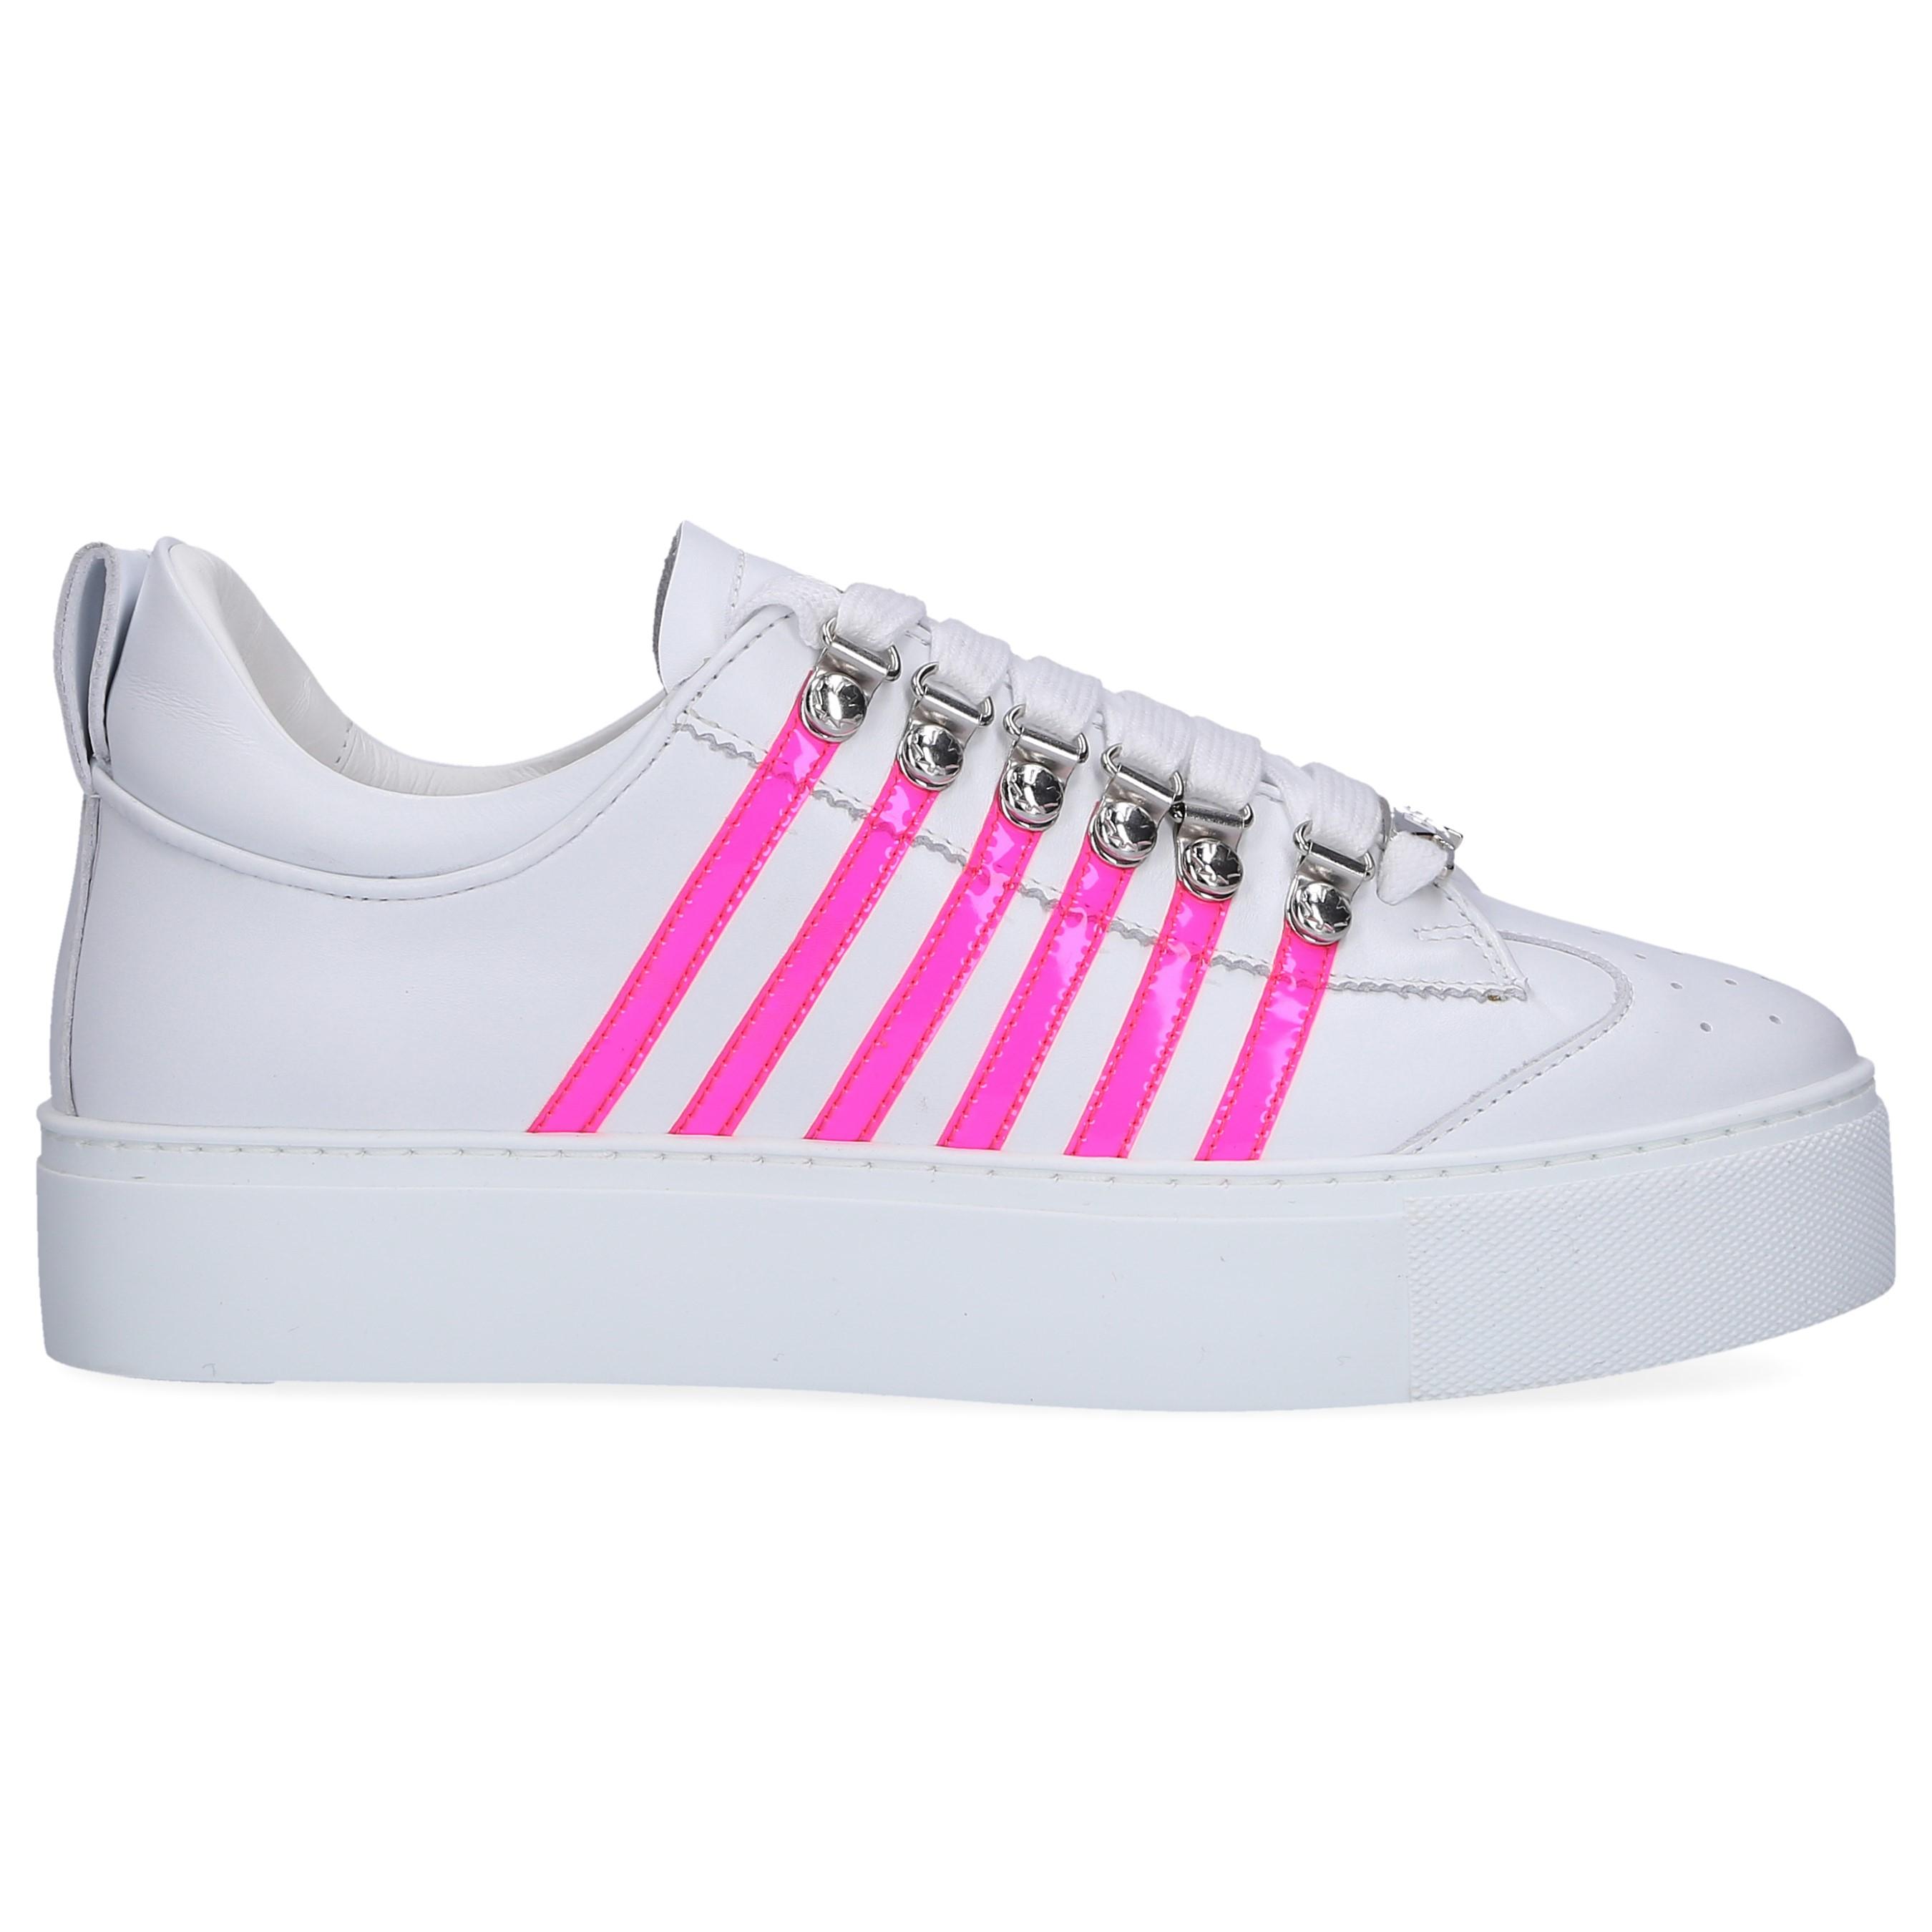 dsquared sneakers pink